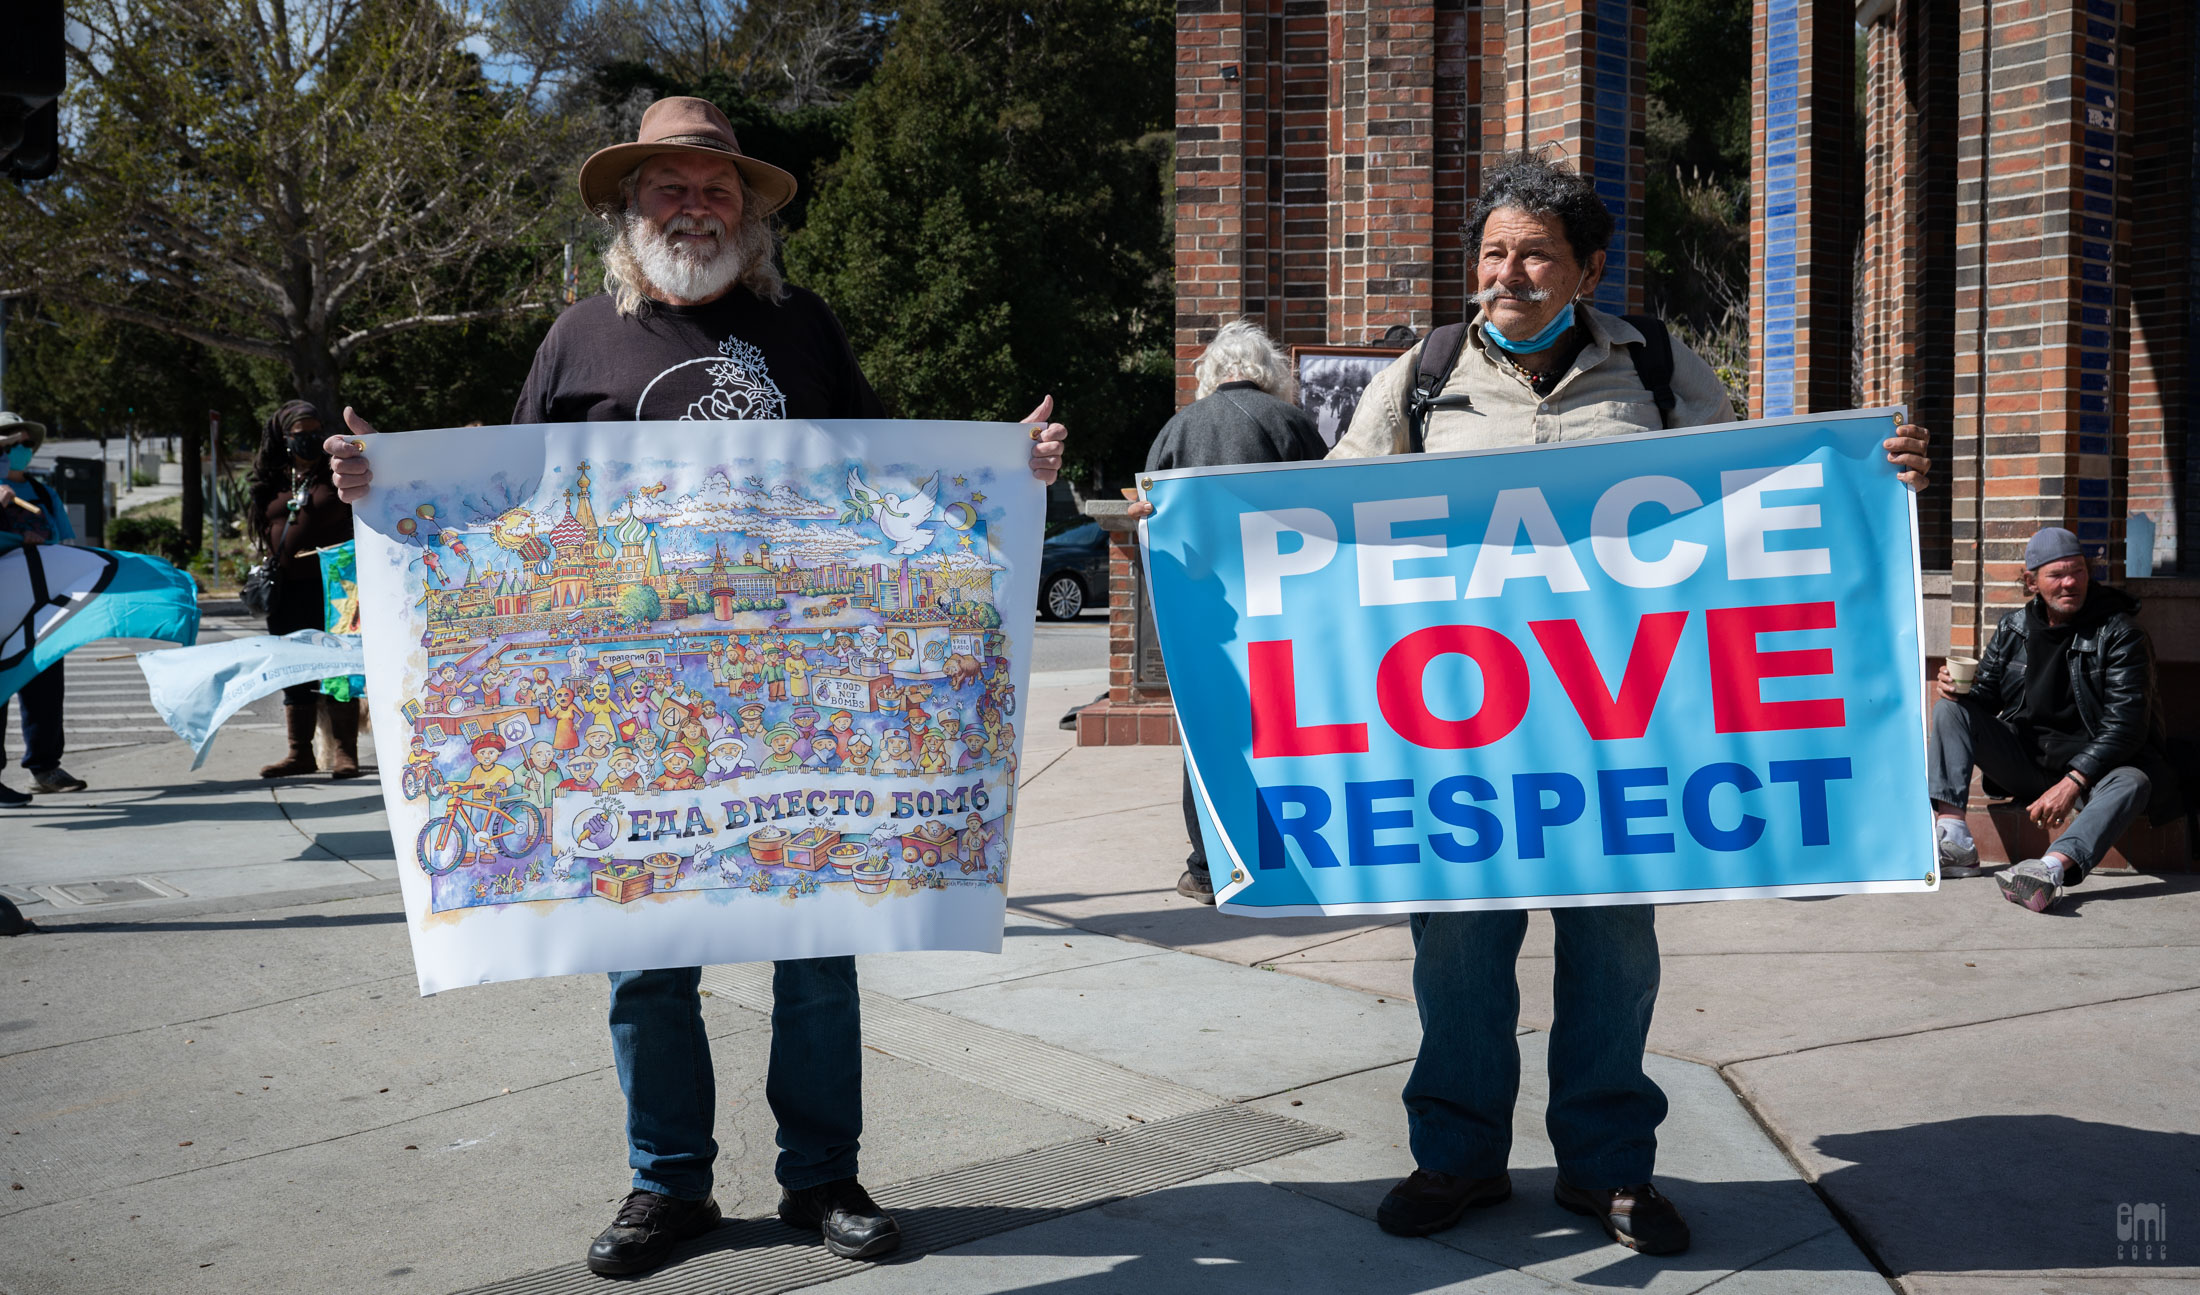 Organization leader Keith McHenry is getting ready for the protest with Russian version of Food Not Bombs banner, while serving food to those people in need at The Clock Tower, Santa Cruz , CA on Sunday afternoon March 6th , 2022 photo by emi